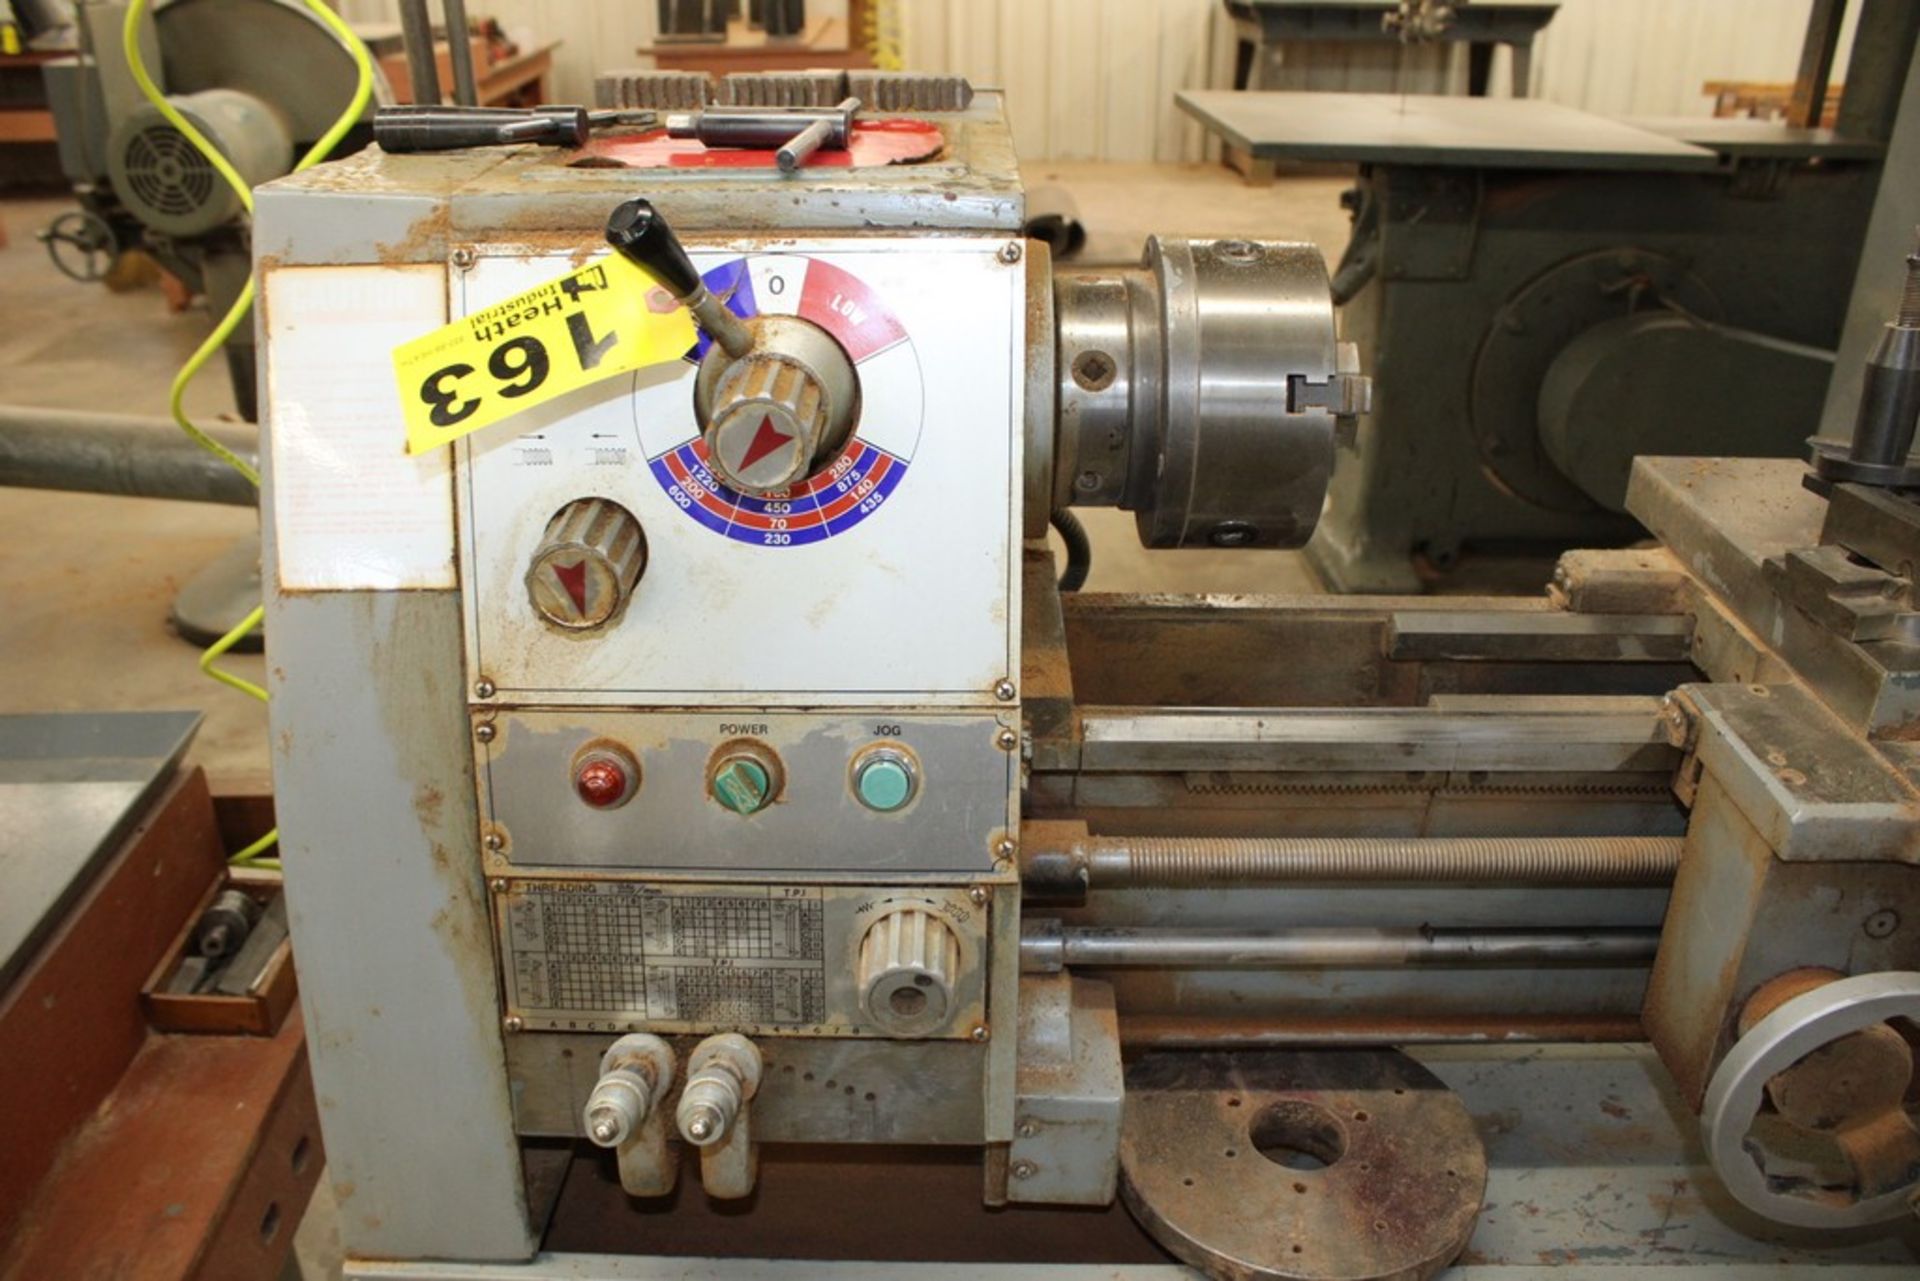 ENCO 12"X36" MODEL 110-2012 TOOLROOM LATHE, S/N 886630, 1,220 RPM SPINDLE, 3-JAW CHUCK, FACE PLATE - Image 2 of 9